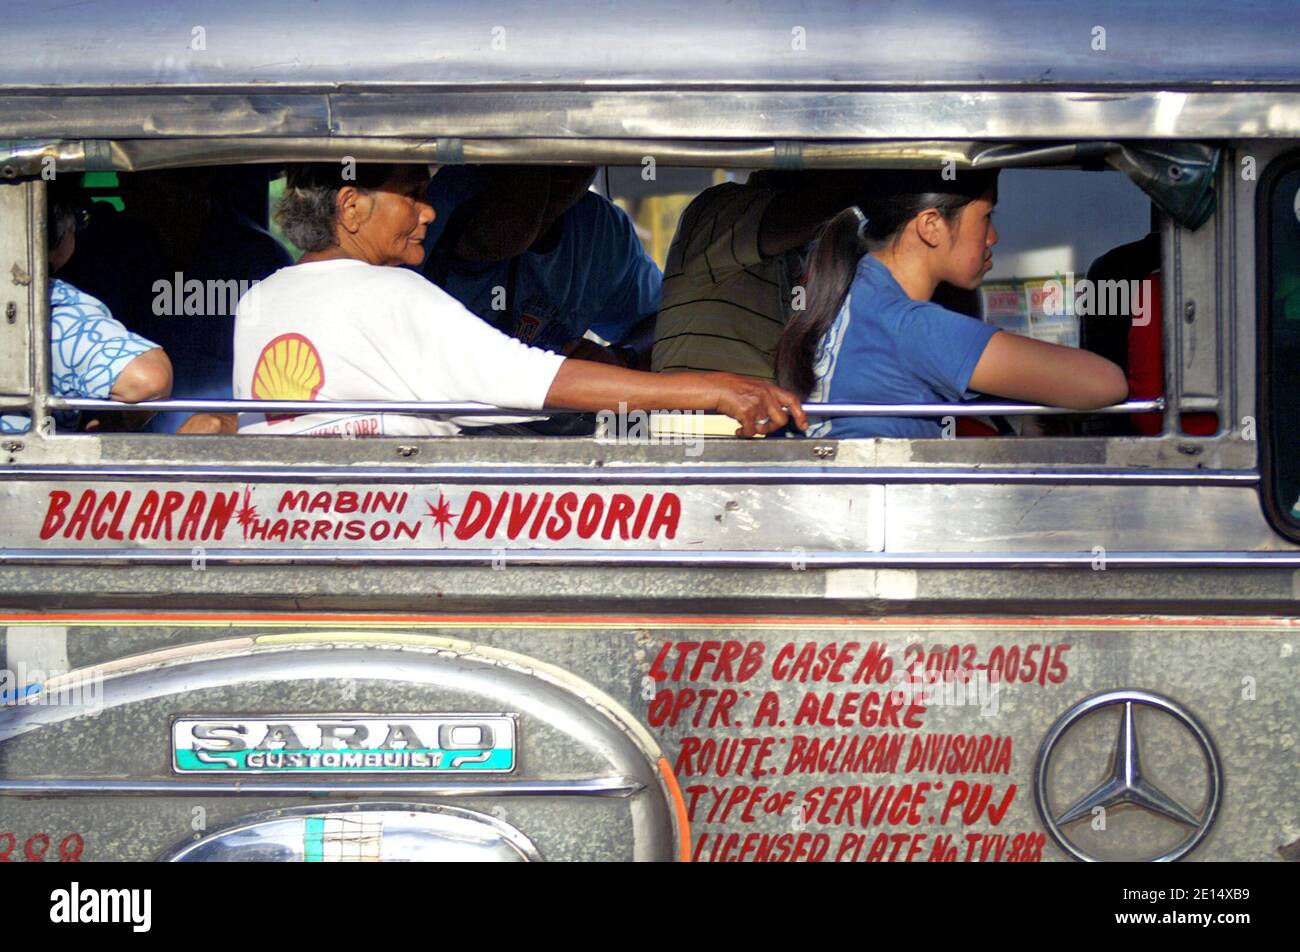 Filipinos take a Jeepney in Manila, Philippines.  The iconic transport includes public and private jeepneys vying different routes written on the side of the vehicle.  Unique to the Philippines, this mode of transportation found its template in the surplus military jeeps left by the US after World War II.  Recent years the vehicles have become more regulated including a phasing out program of Jeepneys more than 15 years old. Stock Photo